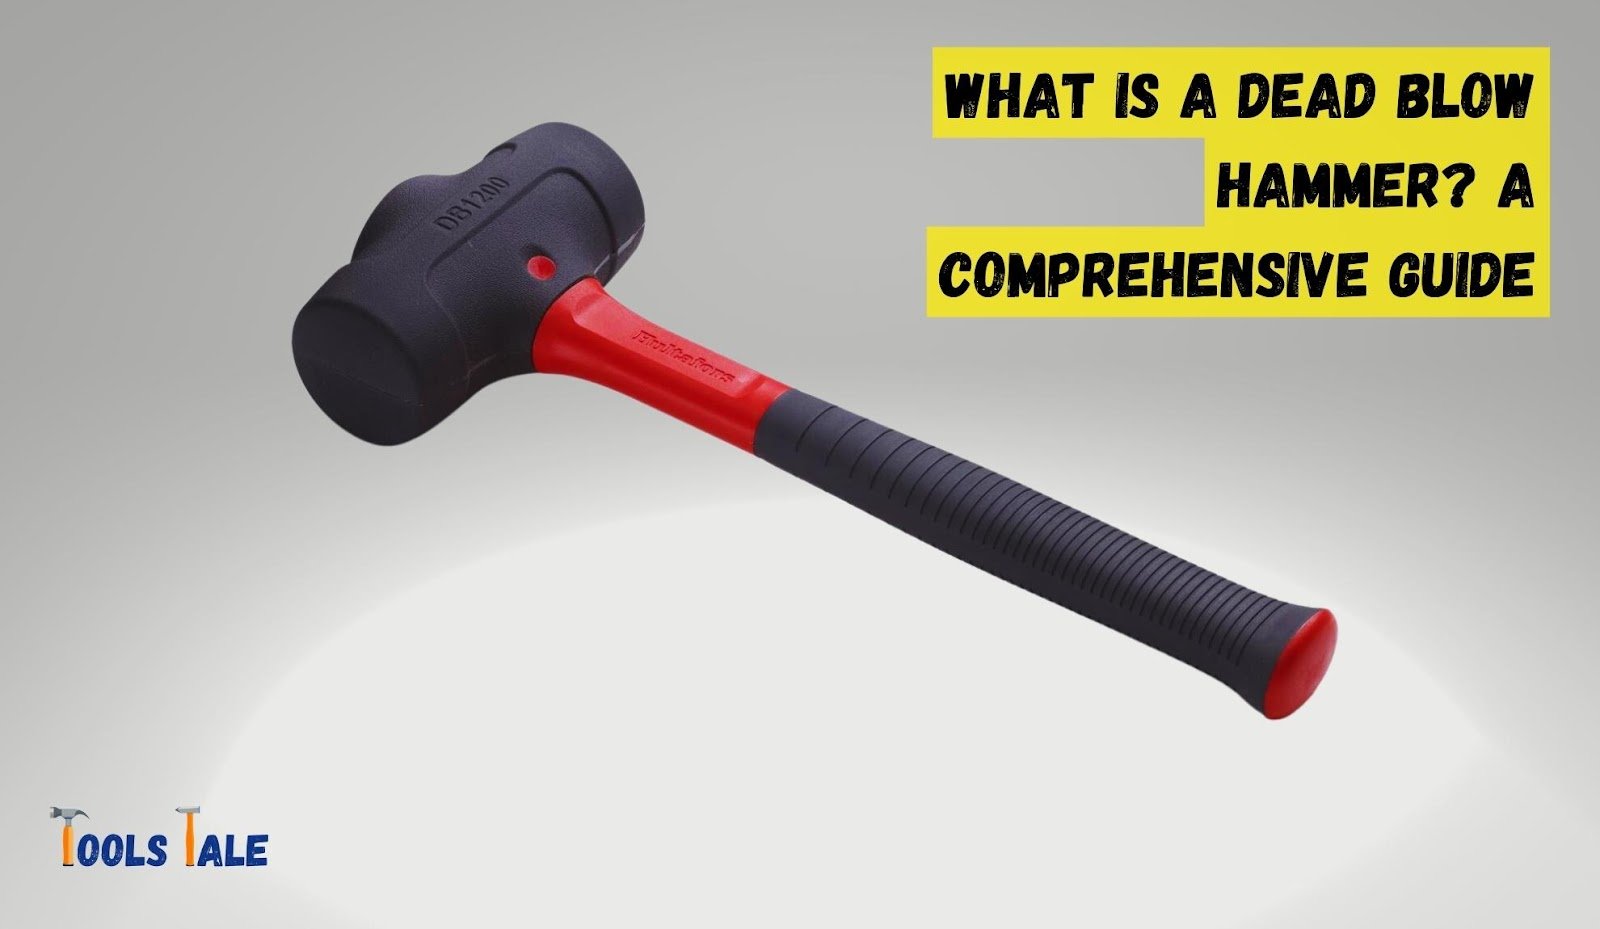 What is a dead blow hammer